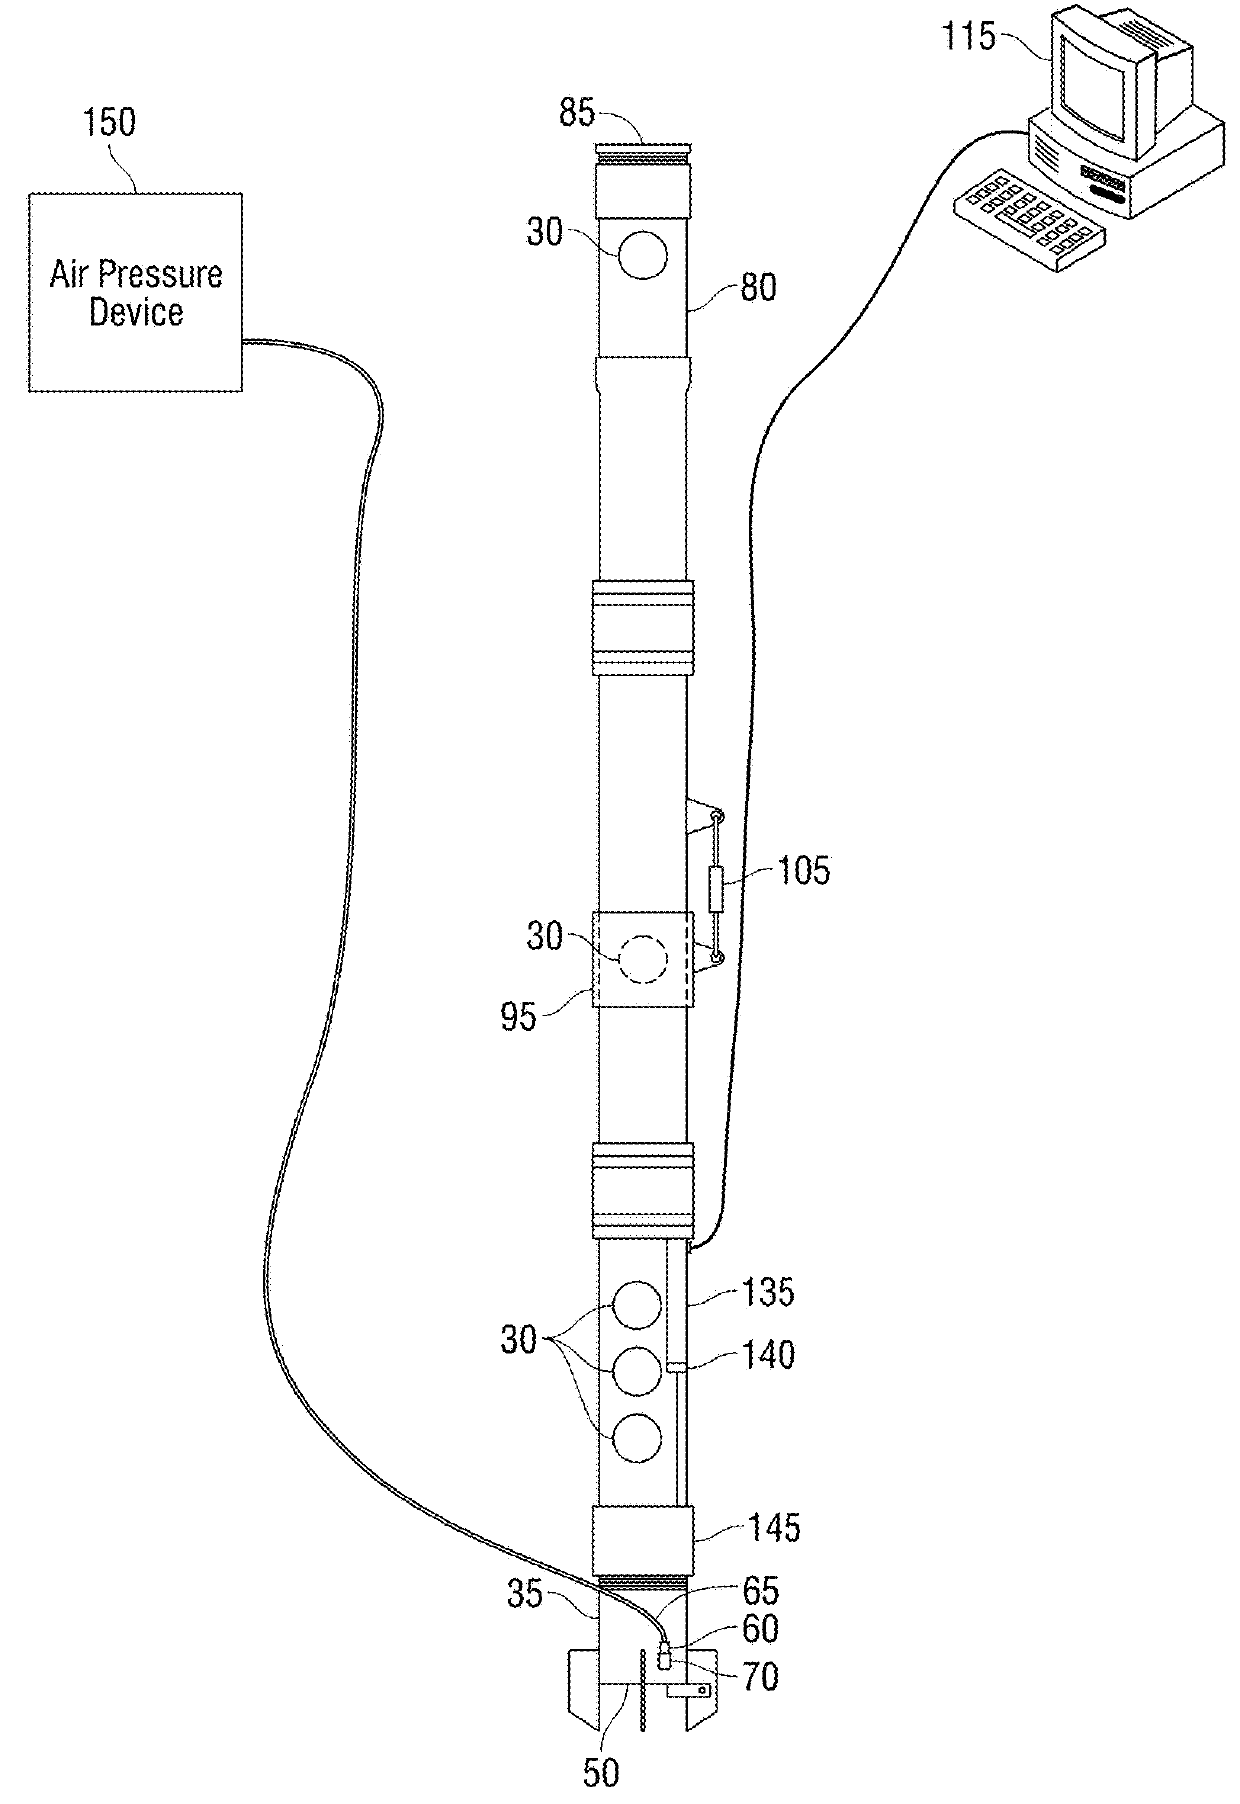 Well-drilling apparatus and method of use